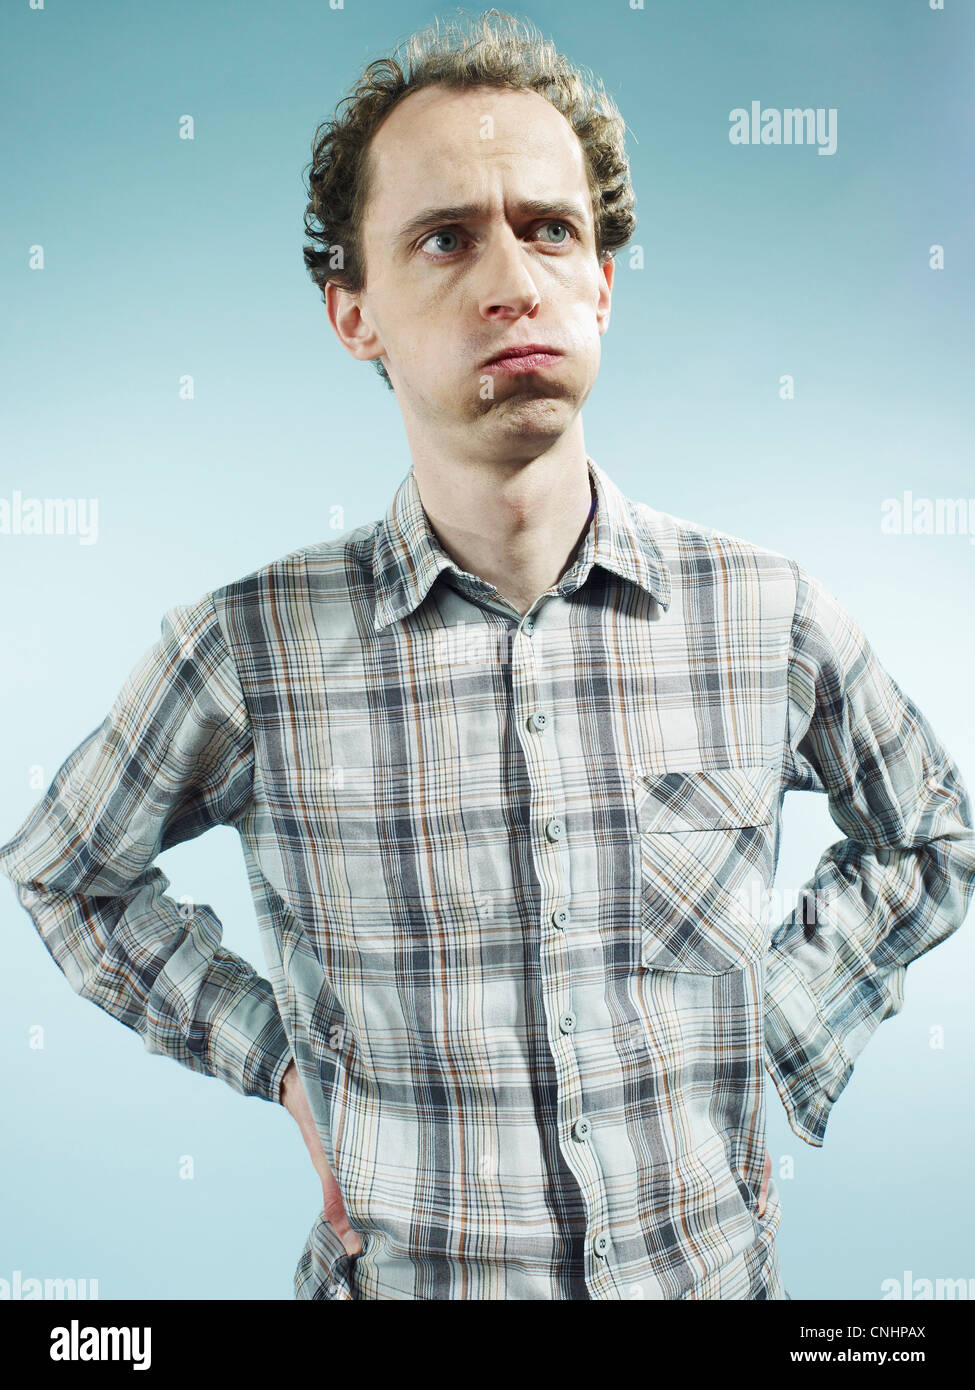 A man with puffed cheeks looking away with uncertainty Stock Photo